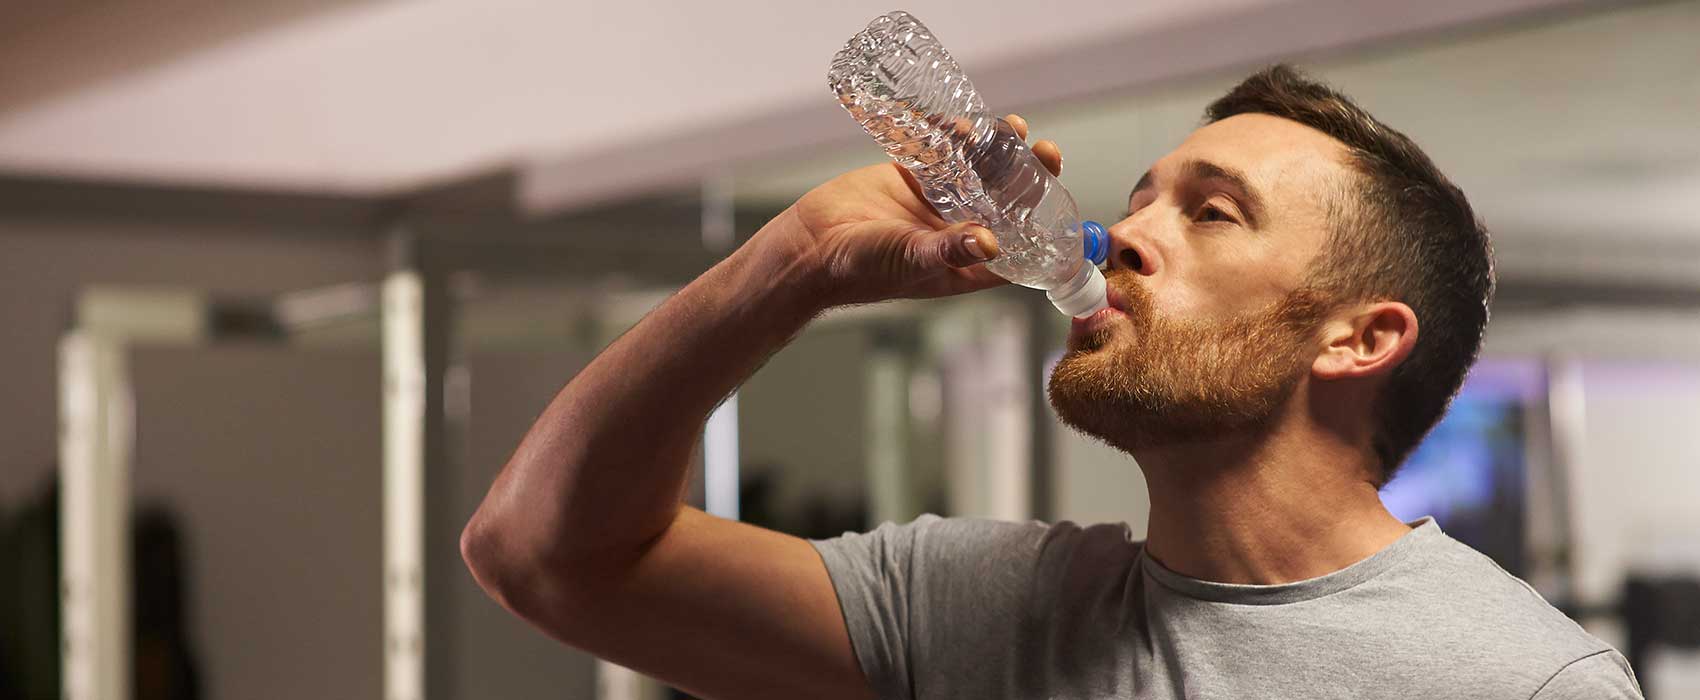 Man drinking a bottle of water at the gym.